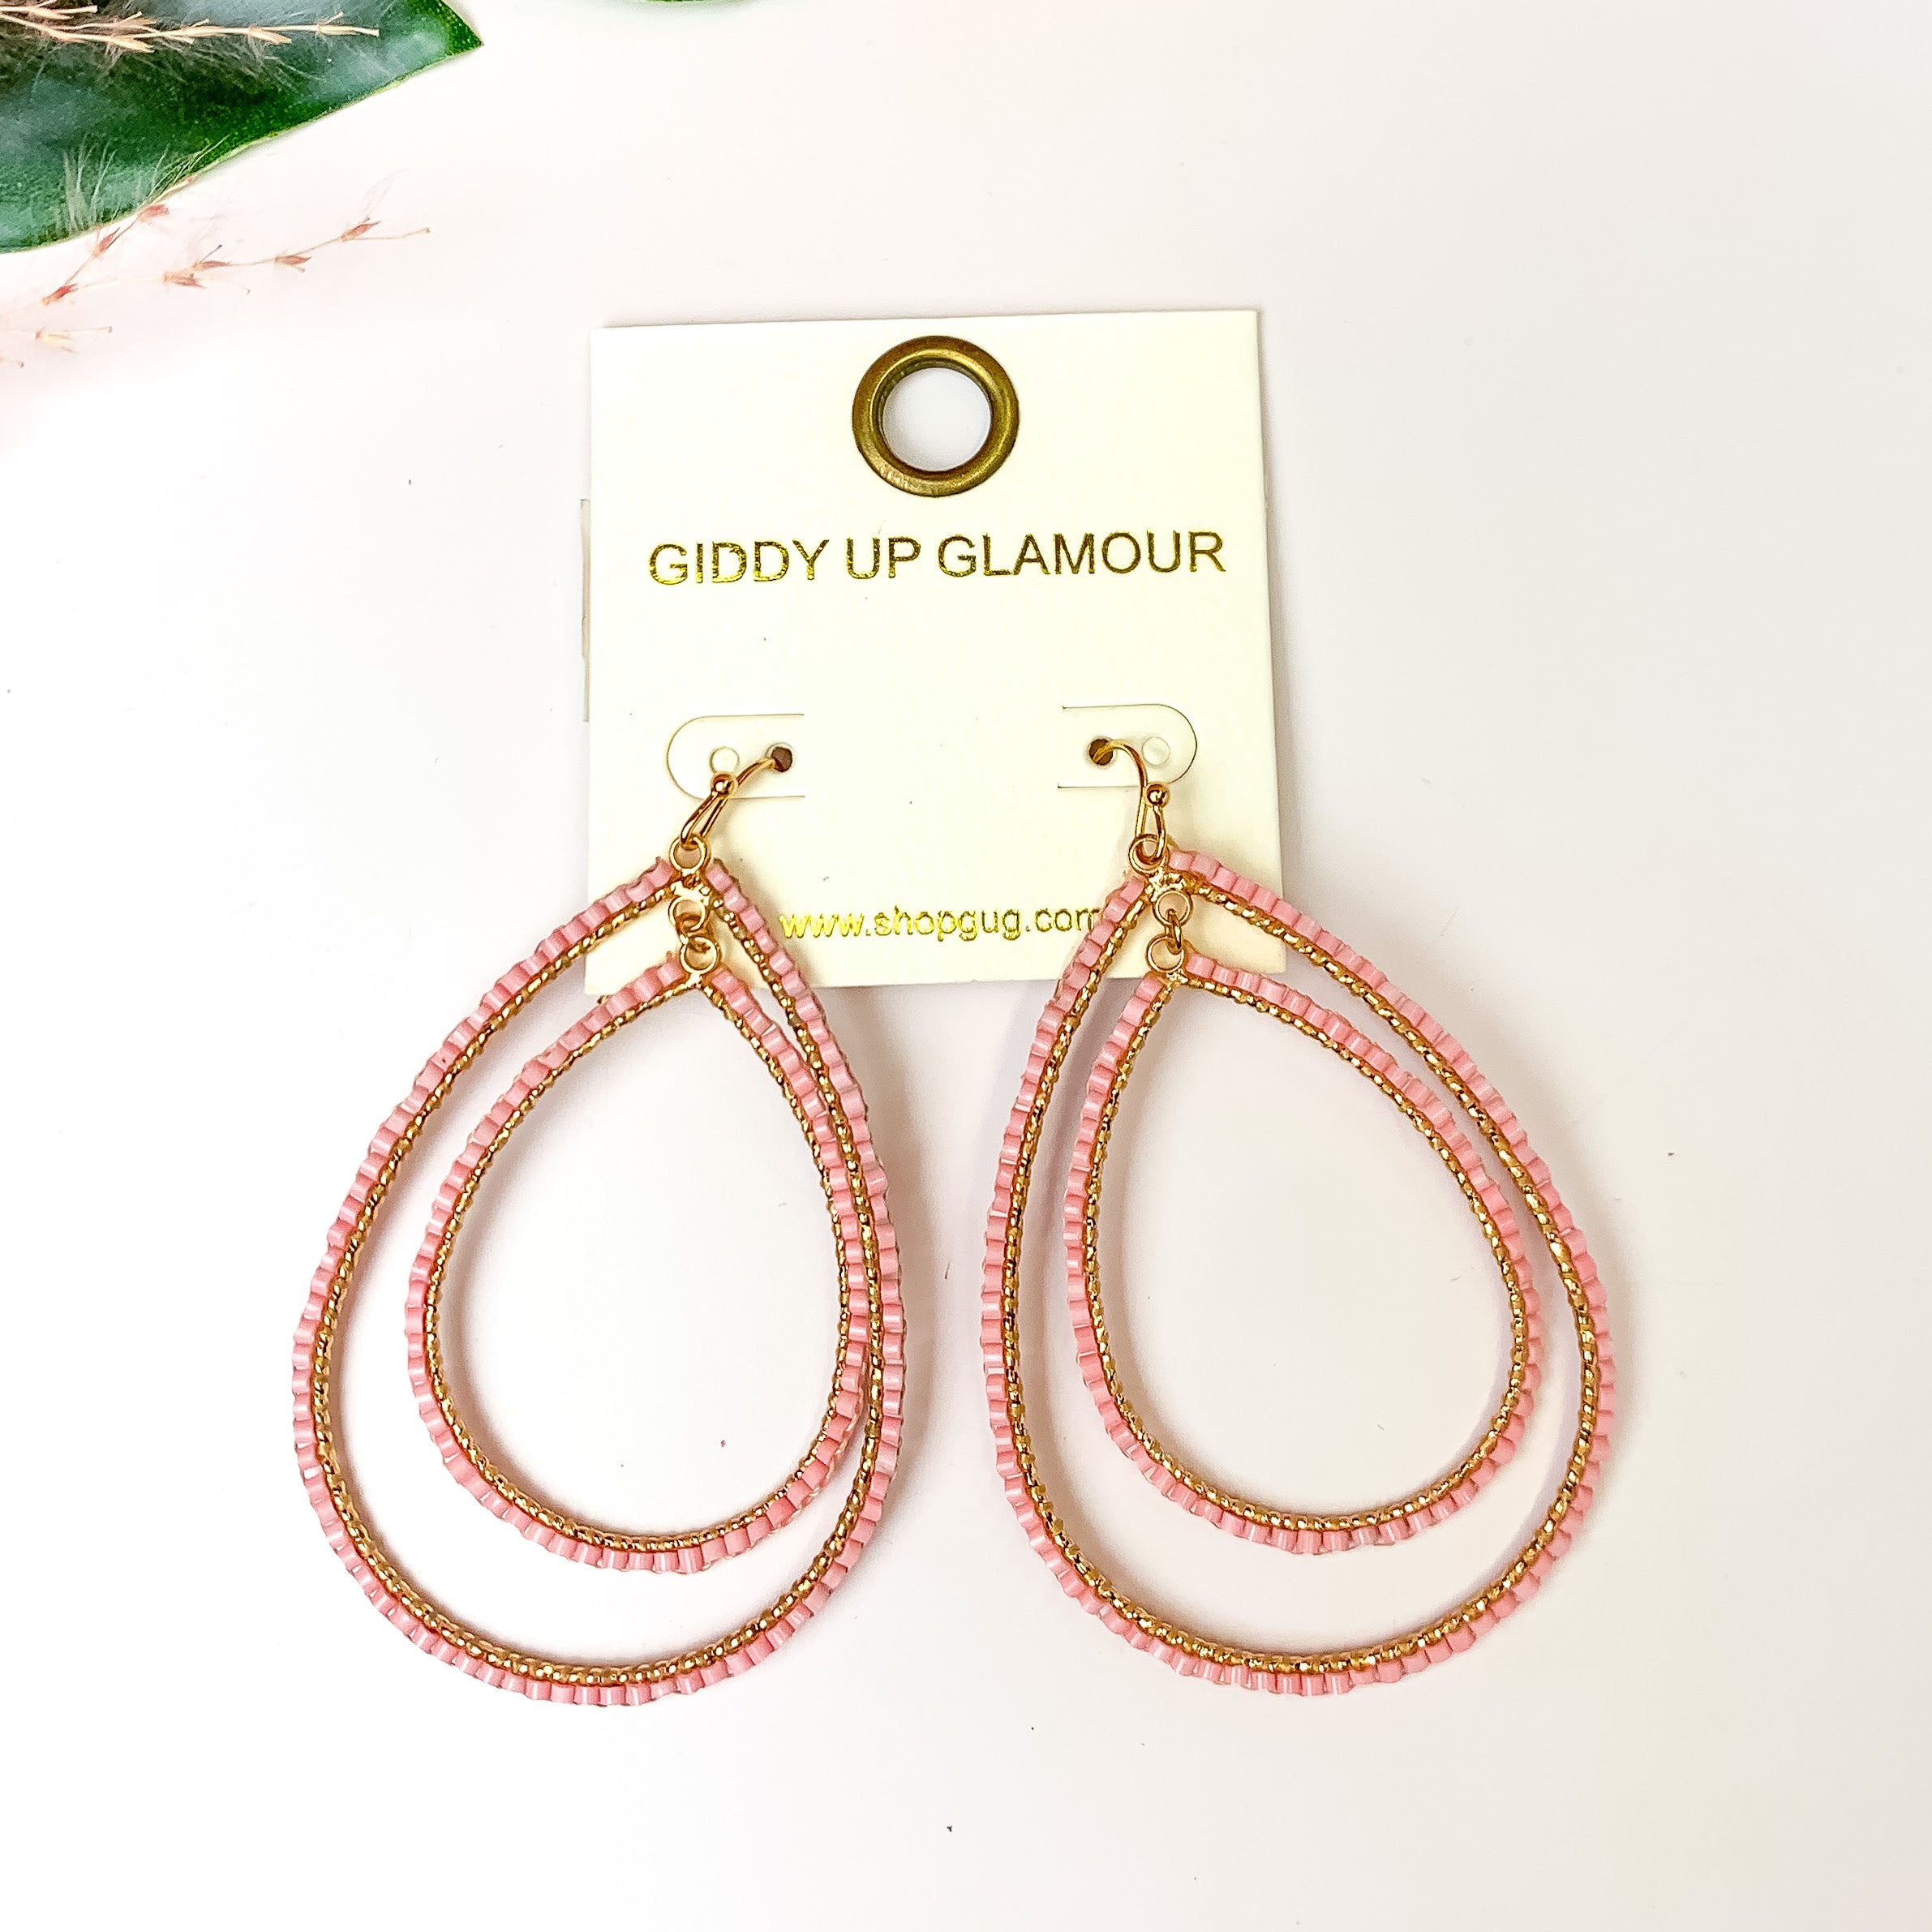 Double Open Teardrop Gold Tone Earrings with Beaded Outline in Light Pink. Pictured on a white background with leaves in the top left corner.